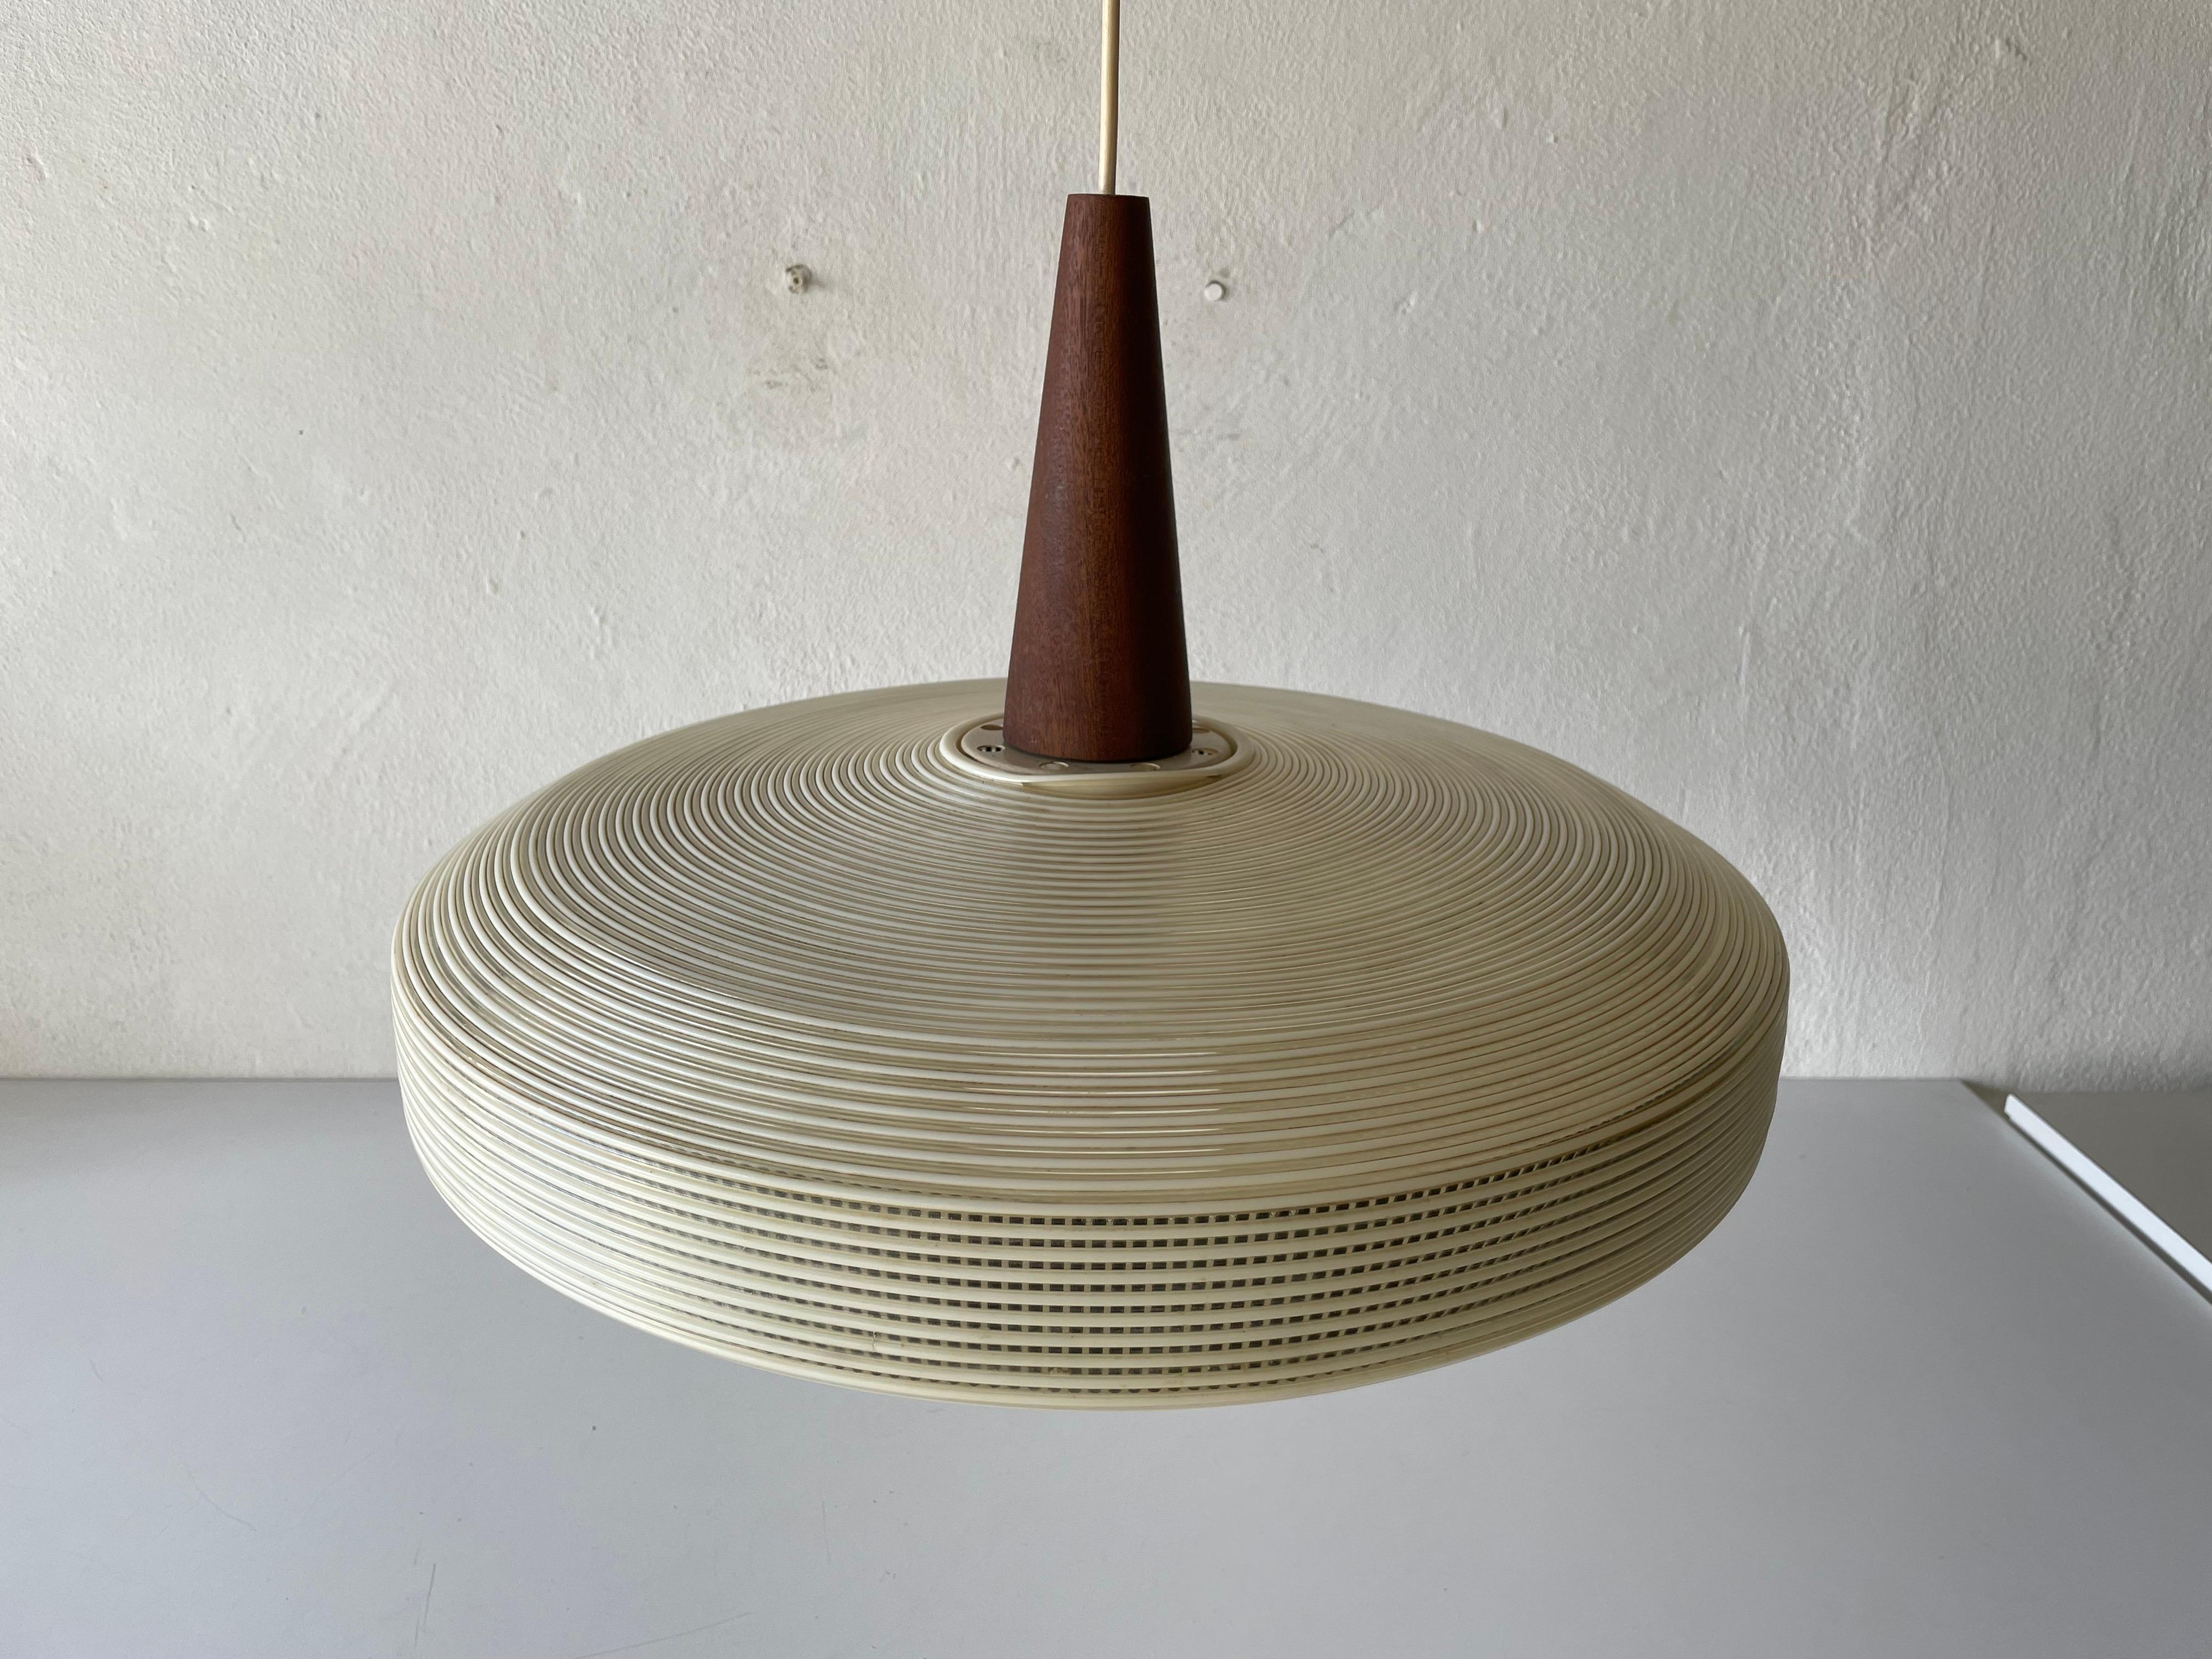 Rare Rotaflex Ceiling Lamp by Yasha Heifetz with Teak Detail, 1960s Germany

Elegant and minimal design hanging lamp

Teak parts and Abs plastic (rotaflex) lampshade
Lampshade is in good condition and very clean. 
This lamp works with E27